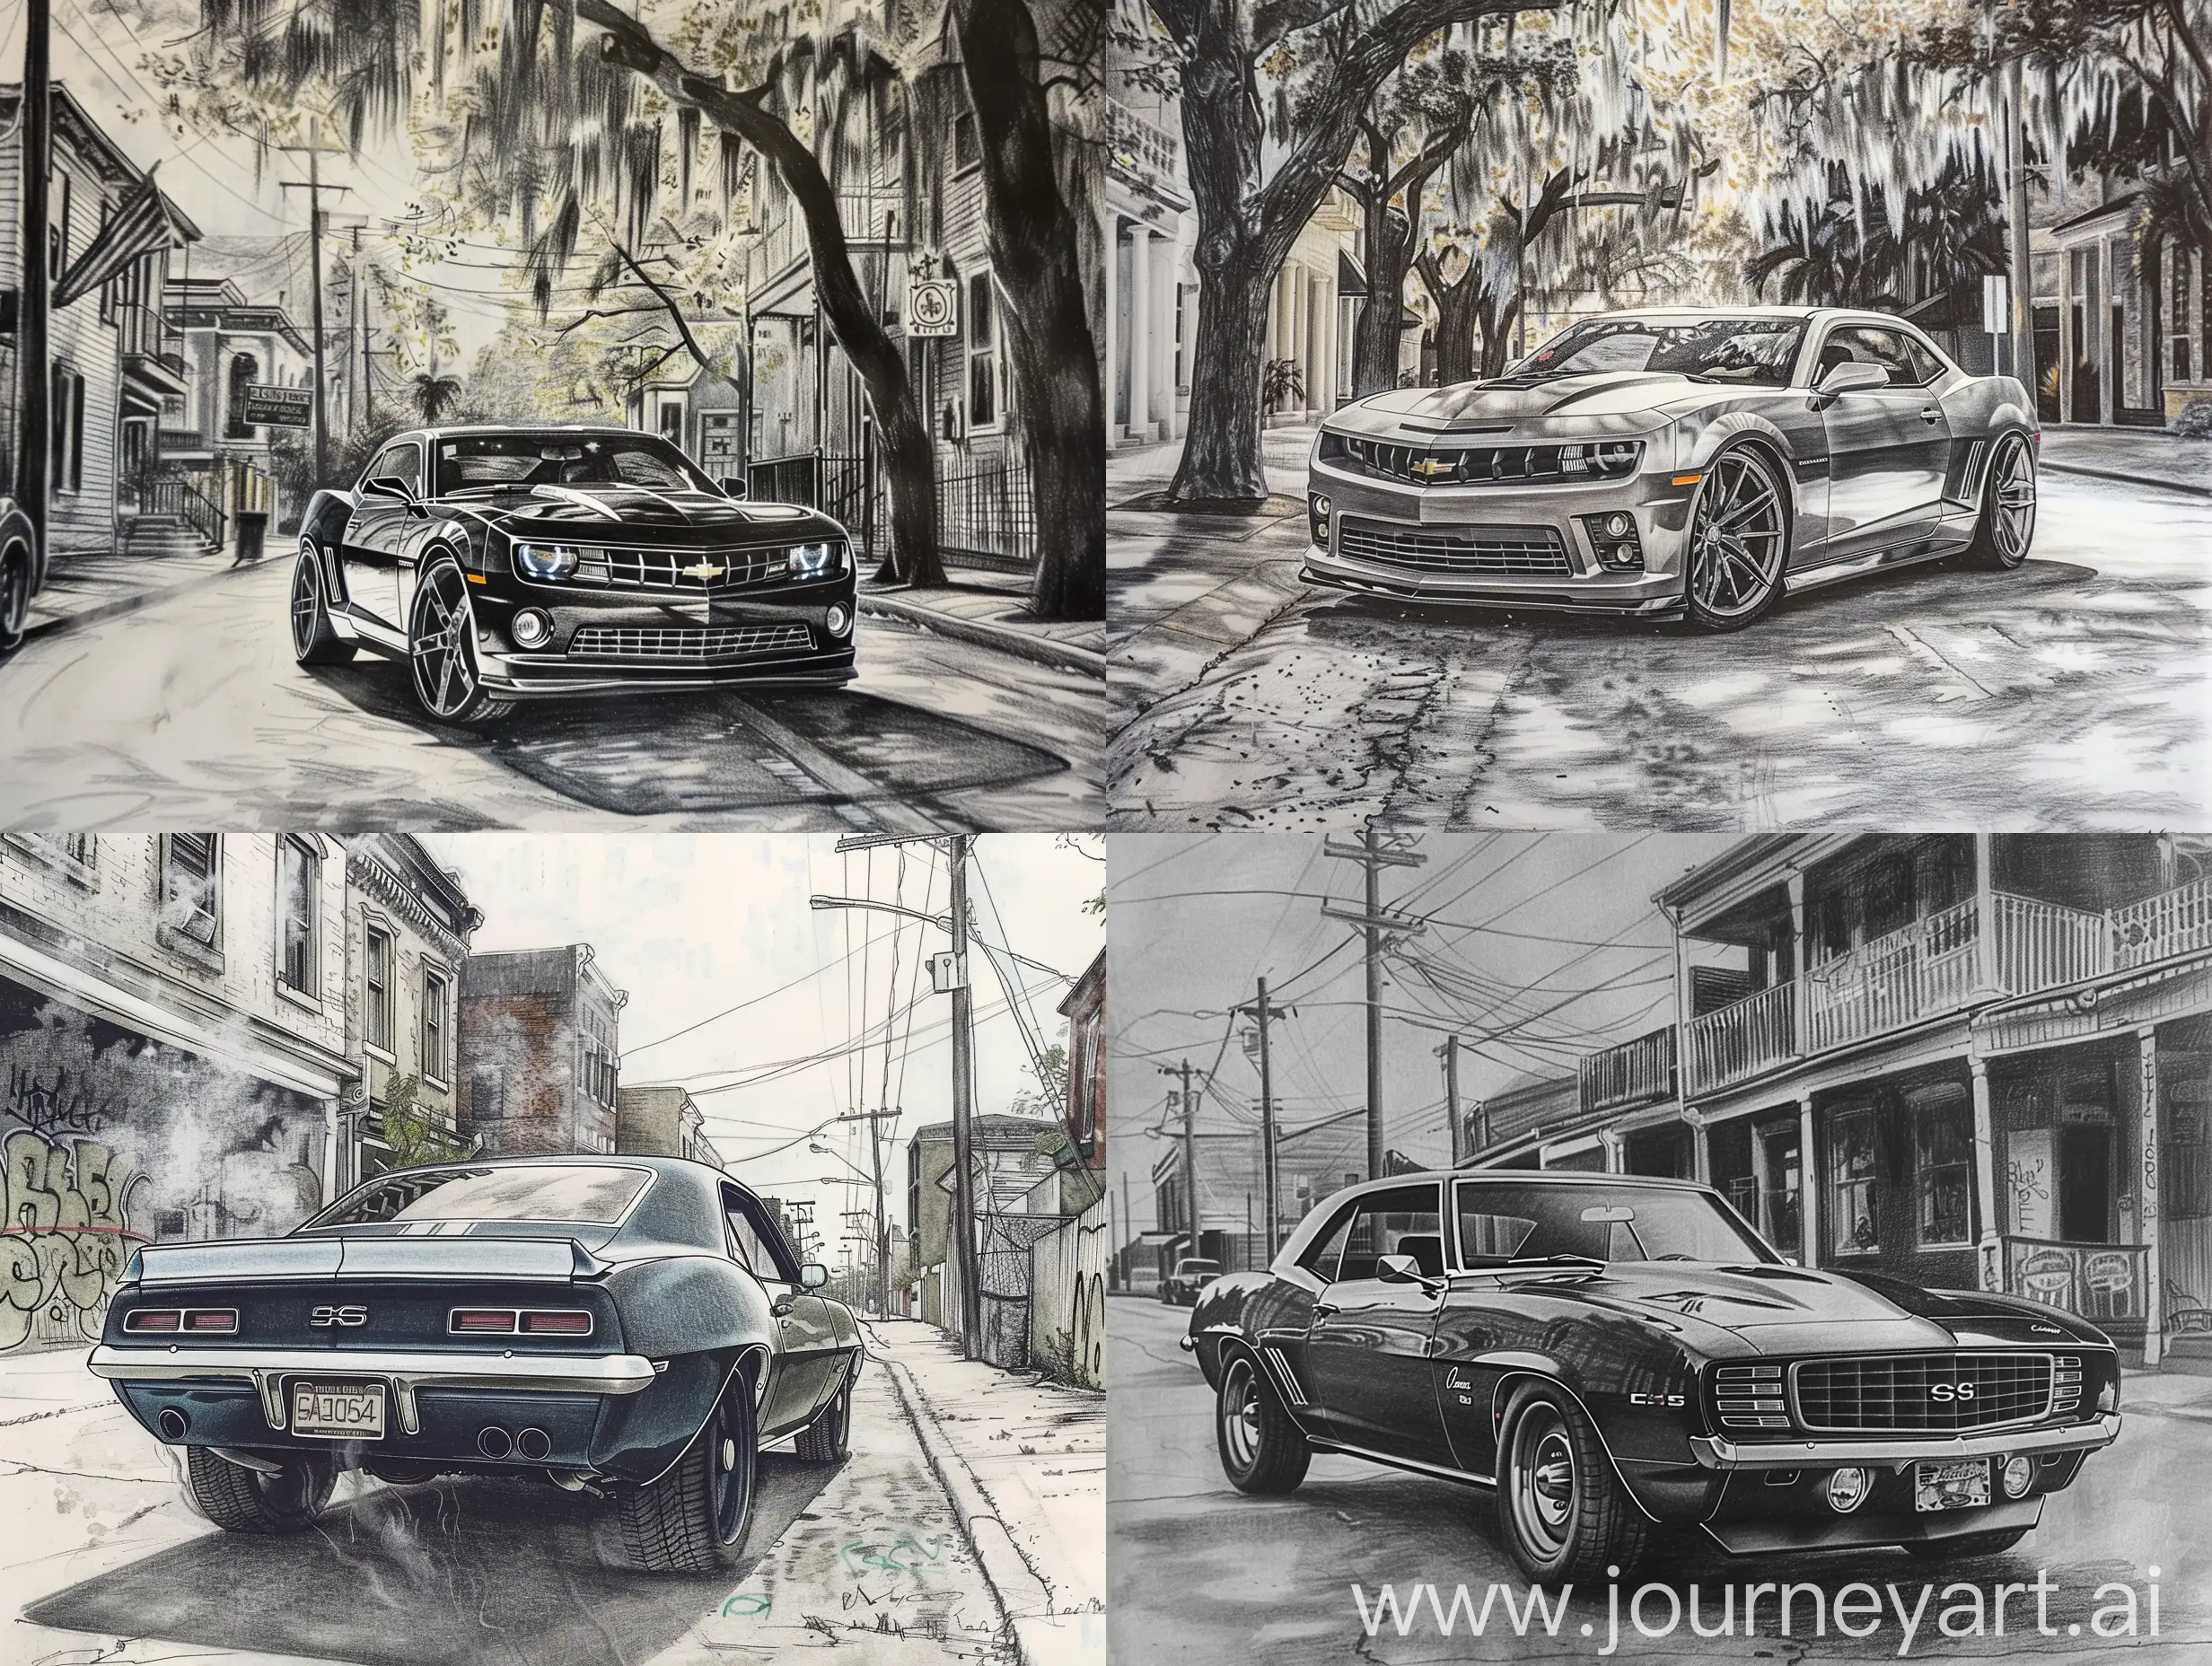 A drawing of a Camaro in the morning down the street, in the style of enigmatic tropics, dieselpunk, photographically detailed portraitures, luxurious wall hangings.